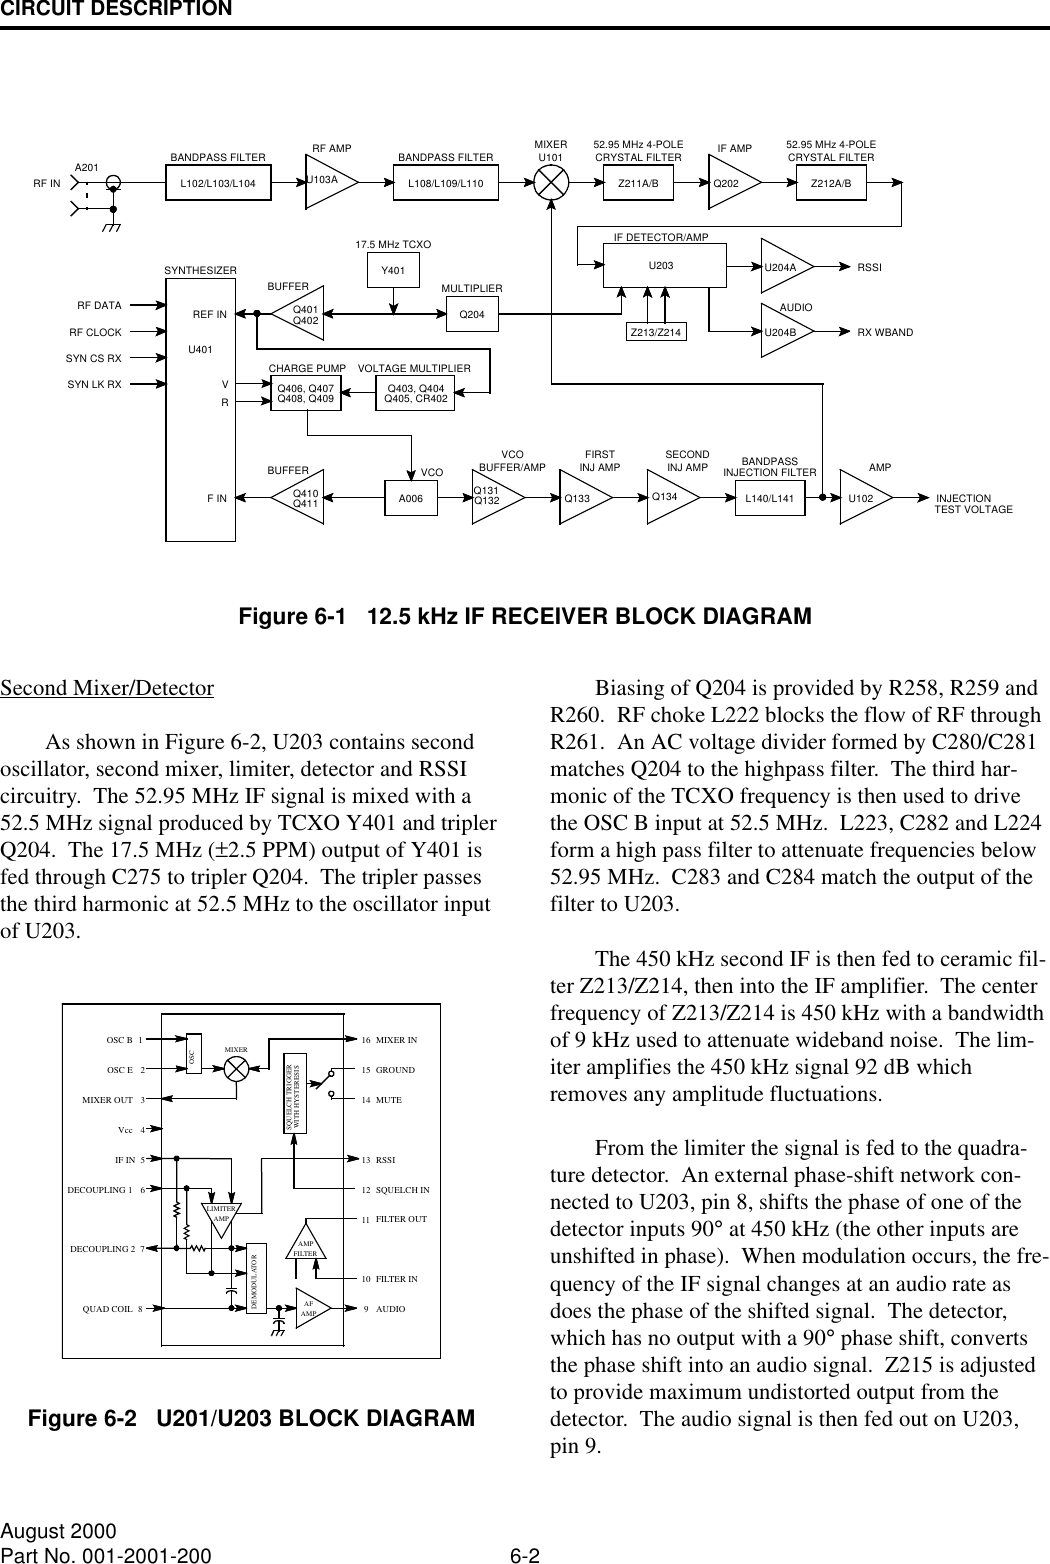 CIRCUIT DESCRIPTION6-2August 2000Part No. 001-2001-200Figure 6-1   12.5 kHz IF RECEIVER BLOCK DIAGRAMBANDPASS FILTERL102/L103/L104A201RF IN U103ABANDPASS FILTERL108/L109/L110U101MIXERZ211A/BCRYSTAL FILTER52.95 MHz 4-POLERF AMP IF AMPQ202CRYSTAL FILTER52.95 MHz 4-POLEZ212A/BU401SYNTHESIZERRF DATARF CLOCKSYN CS RXSYN LK RXBUFFERQ401Q402BUFFERQ410Q411REF INVRF INQ406, Q407Q408, Q409CHARGE PUMP VOLTAGE MULTIPLIERQ403, Q404Q405, CR402Y40117.5 MHz TCXOQ204MULTIPLIERZ213/Z214U203IF DETECTOR/AMPAUDIOU204BU204A RSSIRX WBANDVCOQ131Q132BUFFER/AMPVCO FIRST SECONDINJ AMP INJ AMPQ133 Q134 L140/L141INJECTION FILTERBANDPASSU102AMPINJECTIONTEST VOLTAGEA006Biasing of Q204 is provided by R258, R259 and R260.  RF choke L222 blocks the flow of RF through R261.  An AC voltage divider formed by C280/C281 matches Q204 to the highpass filter.  The third har-monic of the TCXO frequency is then used to drive the OSC B input at 52.5 MHz.  L223, C282 and L224 form a high pass filter to attenuate frequencies below 52.95 MHz.  C283 and C284 match the output of the filter to U203.The 450 kHz second IF is then fed to ceramic fil-ter Z213/Z214, then into the IF amplifier.  The center frequency of Z213/Z214 is 450 kHz with a bandwidth of 9 kHz used to attenuate wideband noise.  The lim-iter amplifies the 450 kHz signal 92 dB which removes any amplitude fluctuations.From the limiter the signal is fed to the quadra-ture detector.  An external phase-shift network con-nected to U203, pin 8, shifts the phase of one of the detector inputs 90° at 450 kHz (the other inputs are unshifted in phase).  When modulation occurs, the fre-quency of the IF signal changes at an audio rate as does the phase of the shifted signal.  The detector, which has no output with a 90° phase shift, converts the phase shift into an audio signal.  Z215 is adjusted to provide maximum undistorted output from the detector.  The audio signal is then fed out on U203, pin 9.Second Mixer/DetectorAs shown in Figure 6-2, U203 contains second oscillator, second mixer, limiter, detector and RSSI circuitry.  The 52.95 MHz IF signal is mixed with a 52.5 MHz signal produced by TCXO Y401 and tripler Q204.  The 17.5 MHz (±2.5 PPM) output of Y401 is fed through C275 to tripler Q204.  The tripler passes the third harmonic at 52.5 MHz to the oscillator input of U203.Figure 6-2   U201/U203 BLOCK DIAGRAMMIXERLIMITEROSCAMPDEMODULATORAMPAMPFILTERSQUELCH TRIGGERWITH HYSTERESISAFQUAD COILDECOUPLING 1DECOUPLING 2GROUNDSQUELCH INFILTER OUTFILTER INRSSIAUDIO910111213MUTE141516 MIXER INIF INVccMIXER OUTOSC E765432OSC B 18